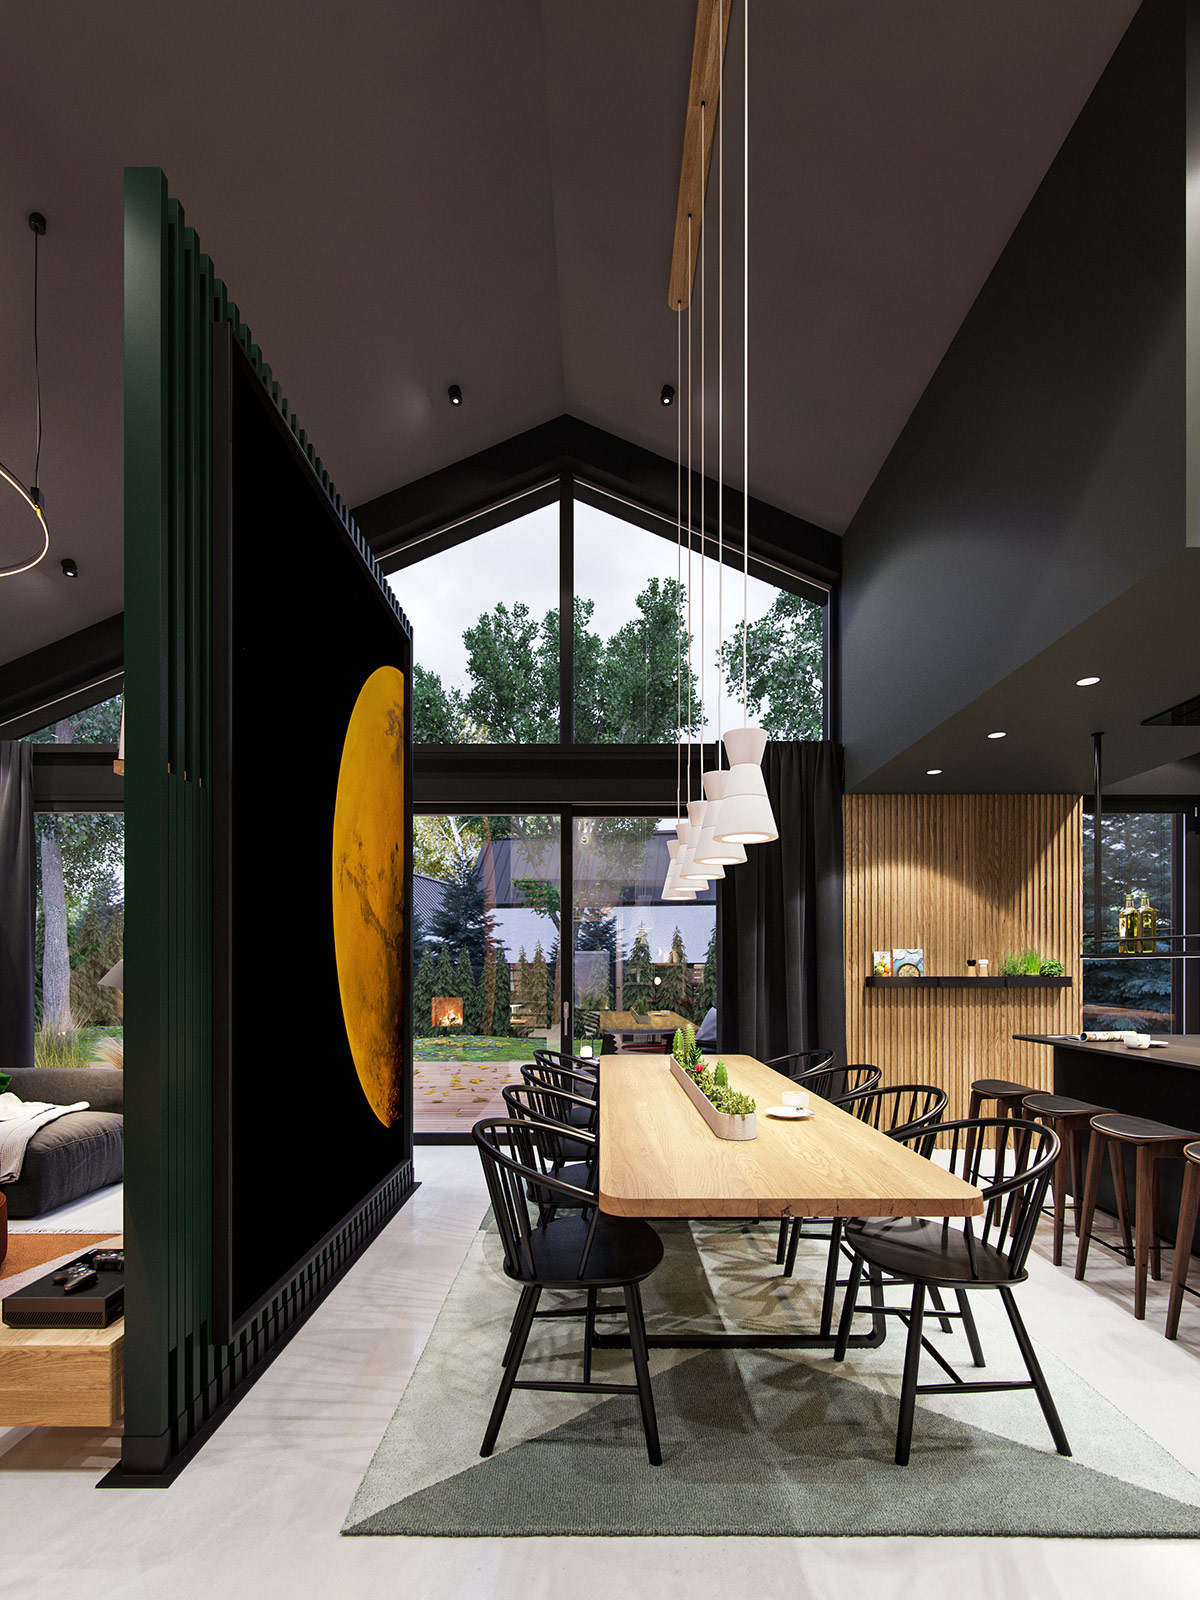 Interstellar, An Out Of This World Stylish Home Interior